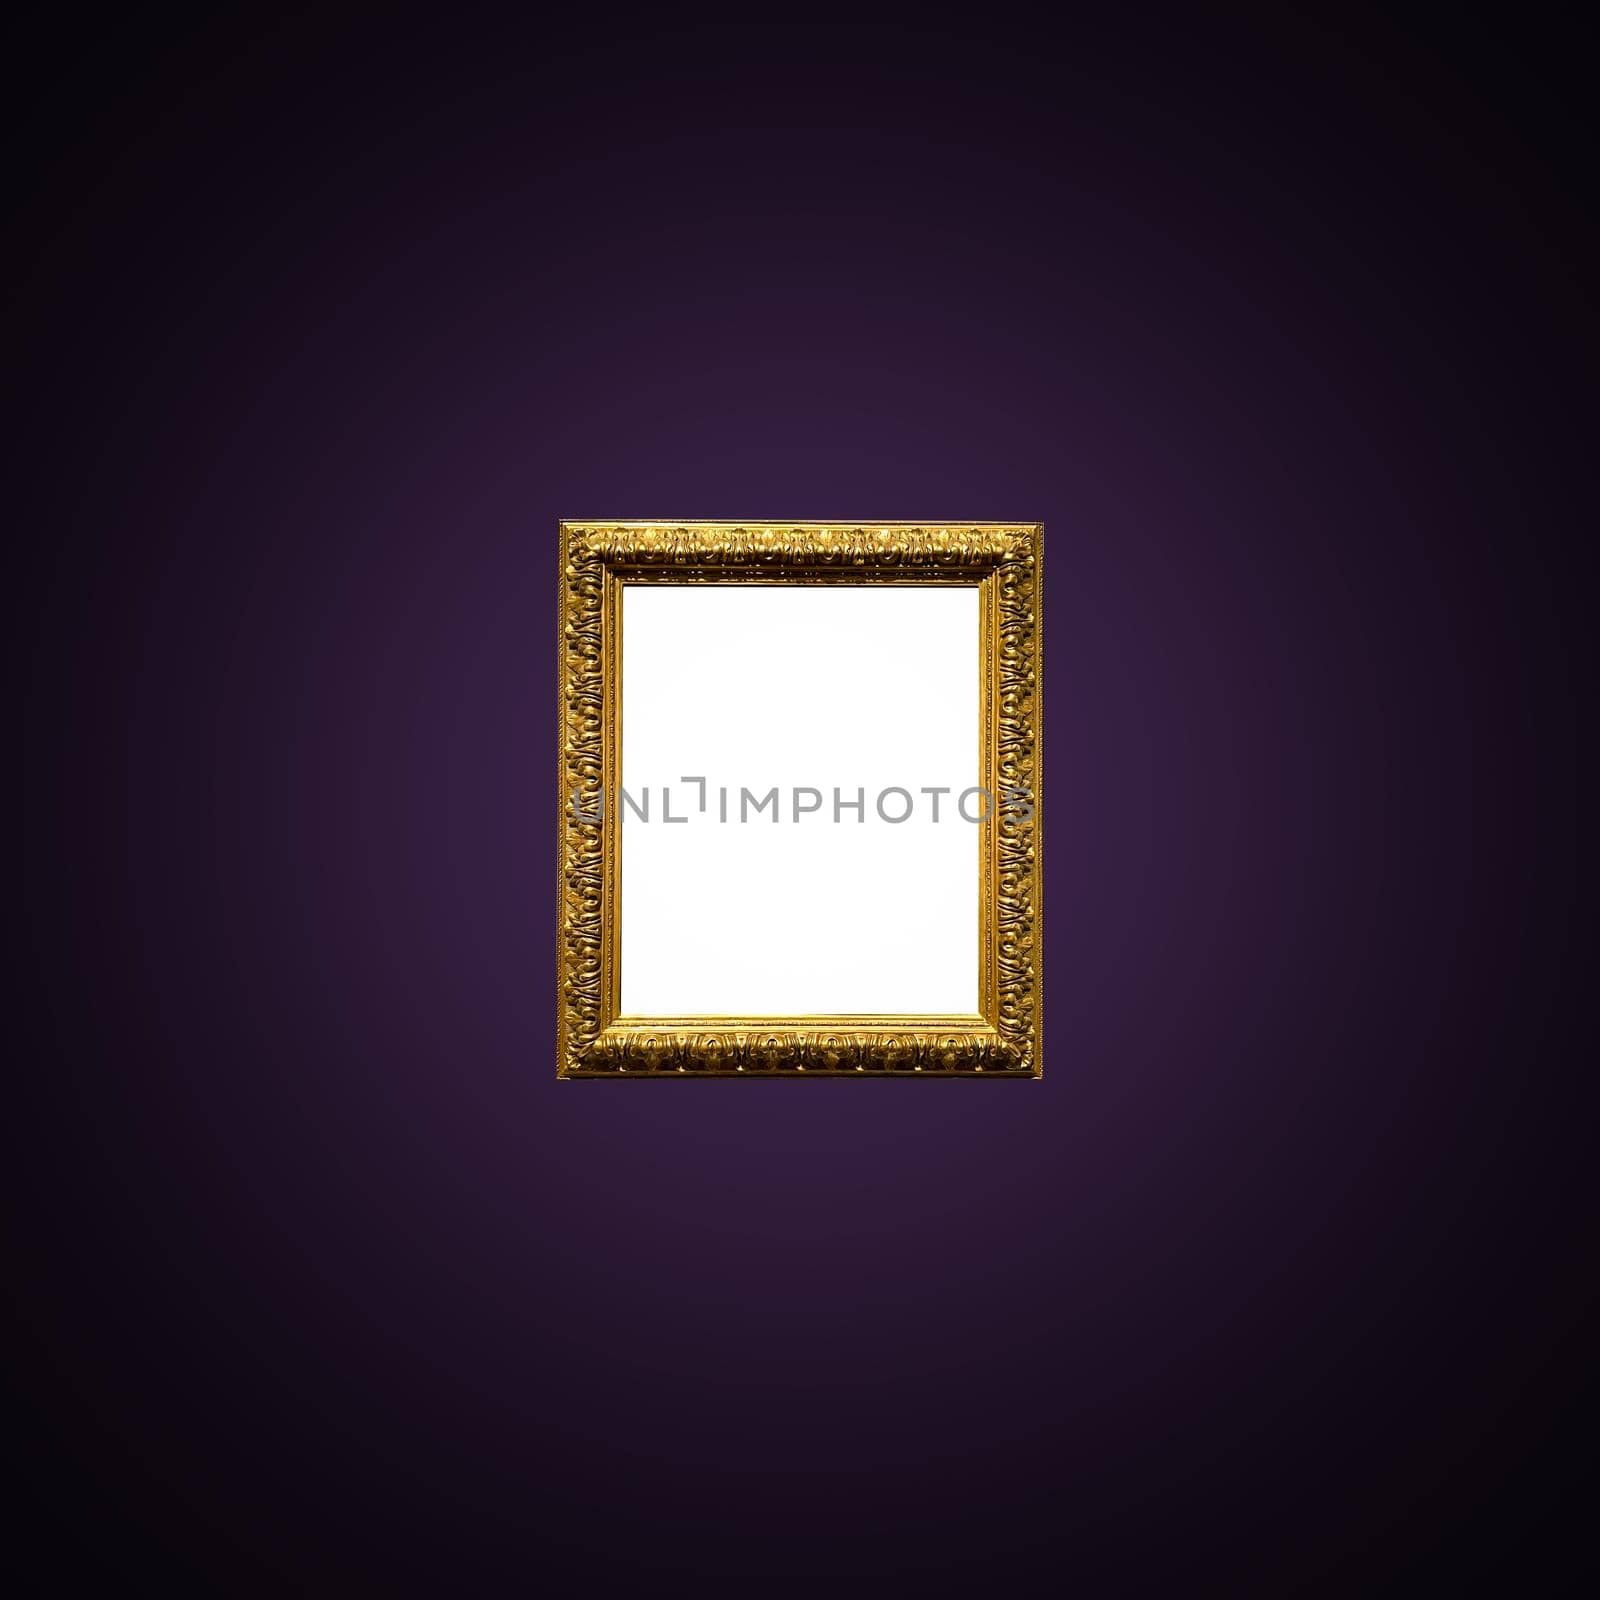 Antique art fair gallery frame on royal purple wall at auction house or museum exhibition, blank template with empty white copyspace for mockup design, artwork by Anneleven